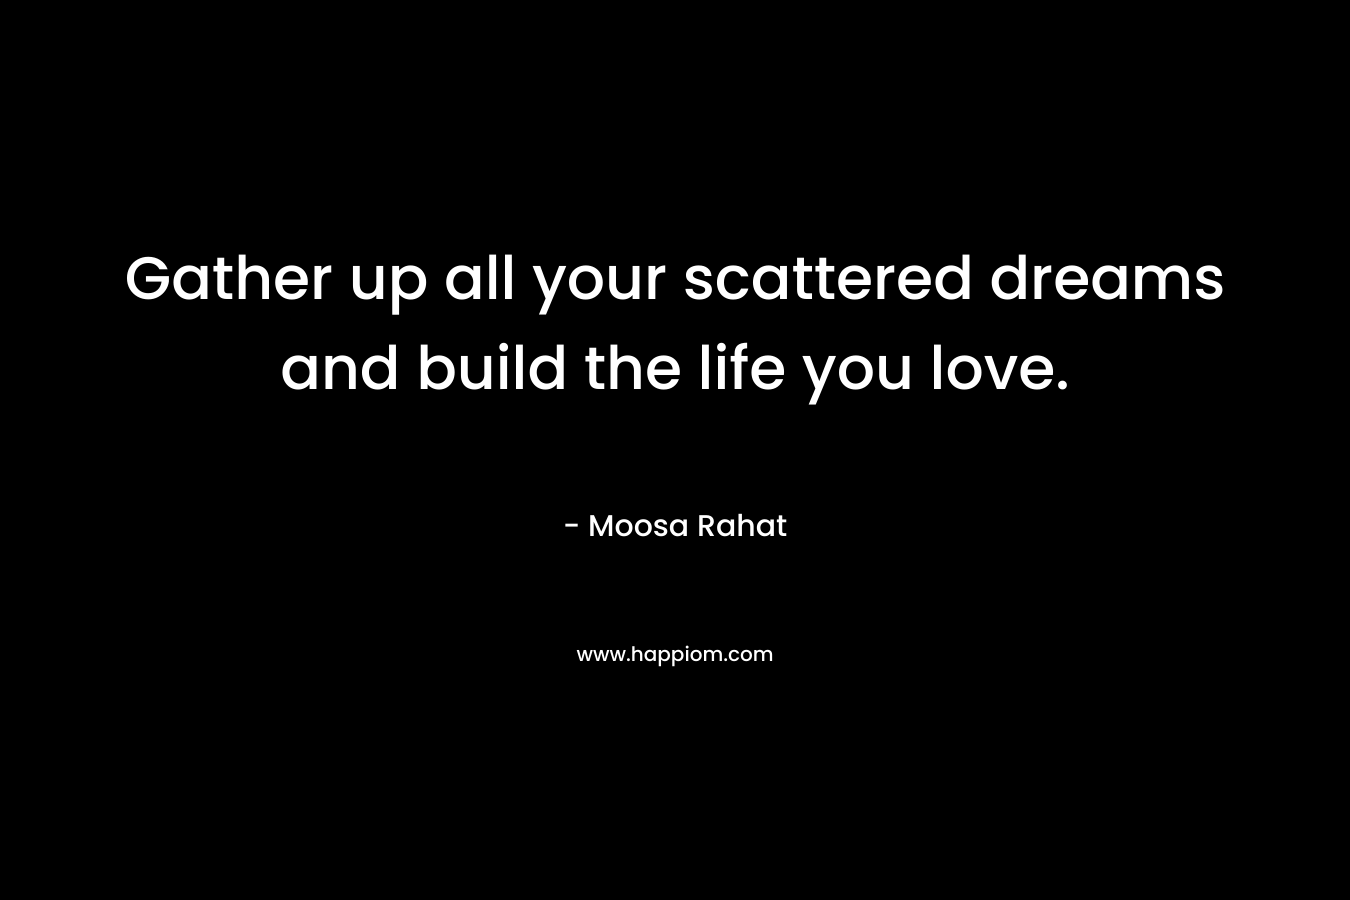 Gather up all your scattered dreams and build the life you love.